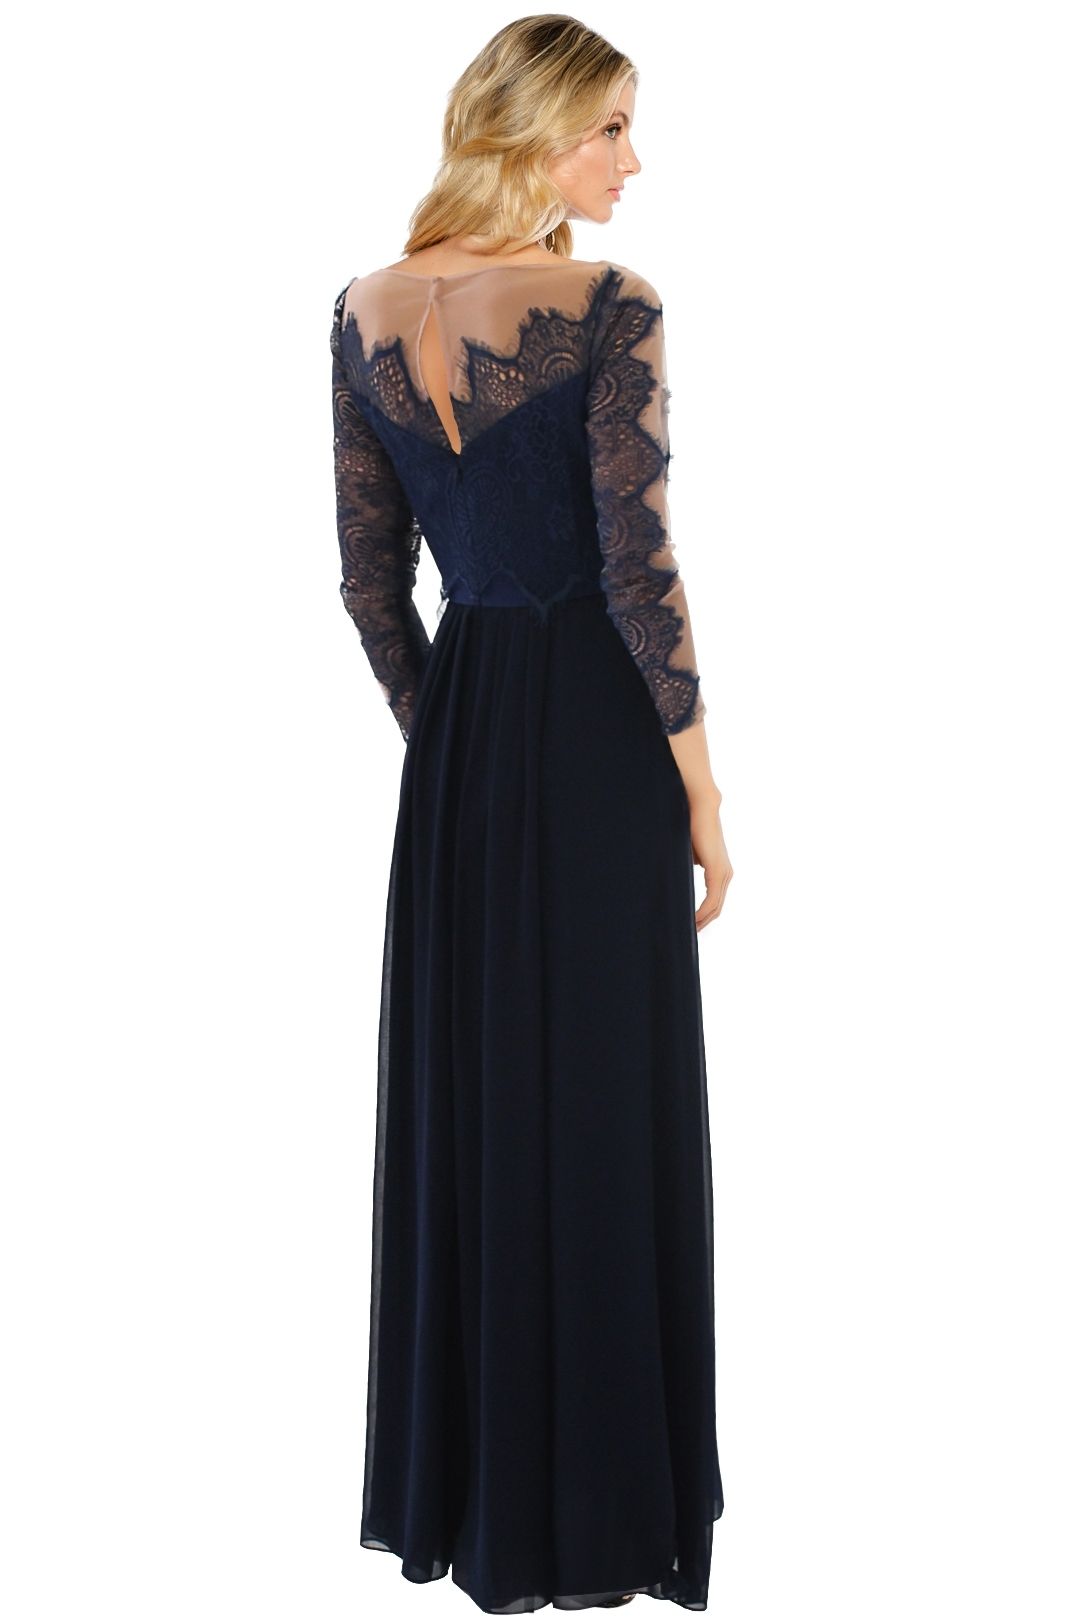 The Dress Shoppe - Gone With The Edge Gown - Navy - Back